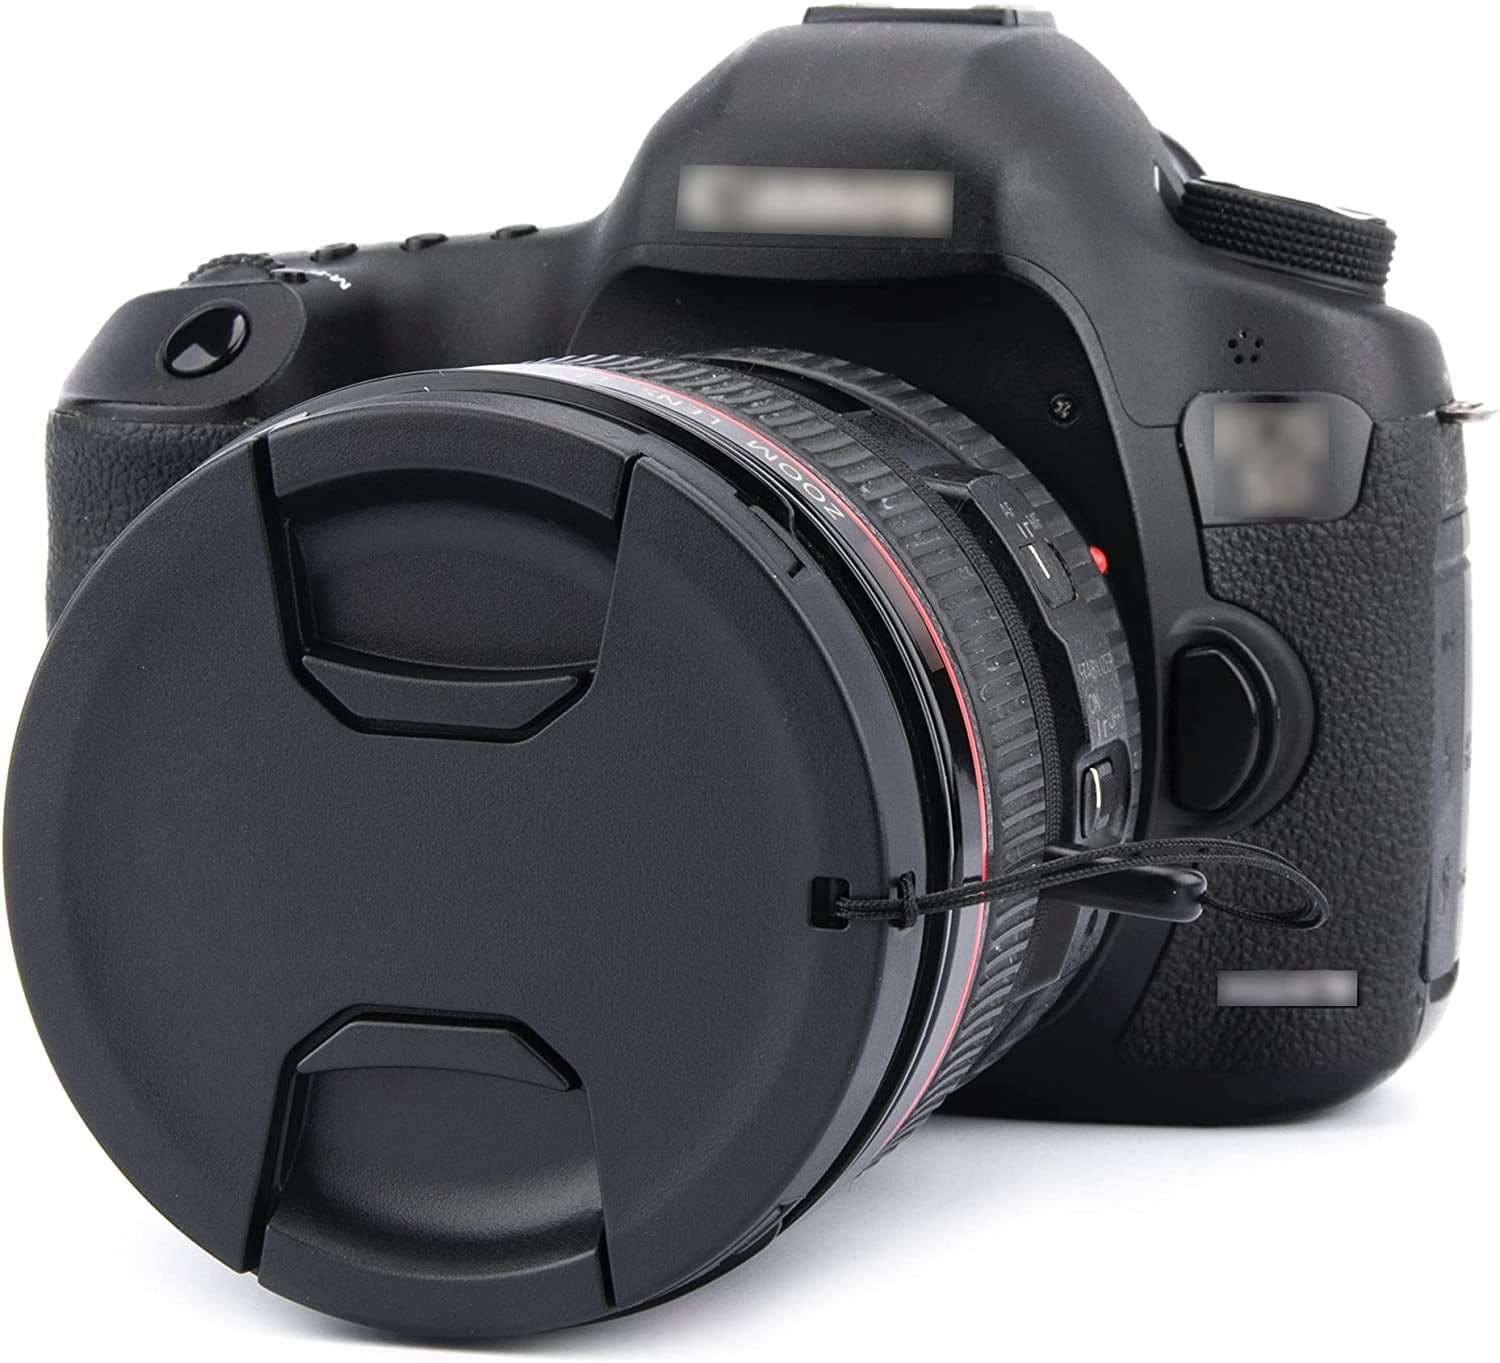 77Mm Front Lens Cap Cover with Keeper for Canon EOS 6D 6DM2 5D Mark IV with EF 24-105Mm or 24-70Mm F4L Kit Lens for Nikon D750 D780 with AF-S 24-120Mm F4G Kit Lens & More Lens with 77Mm Filter Thread